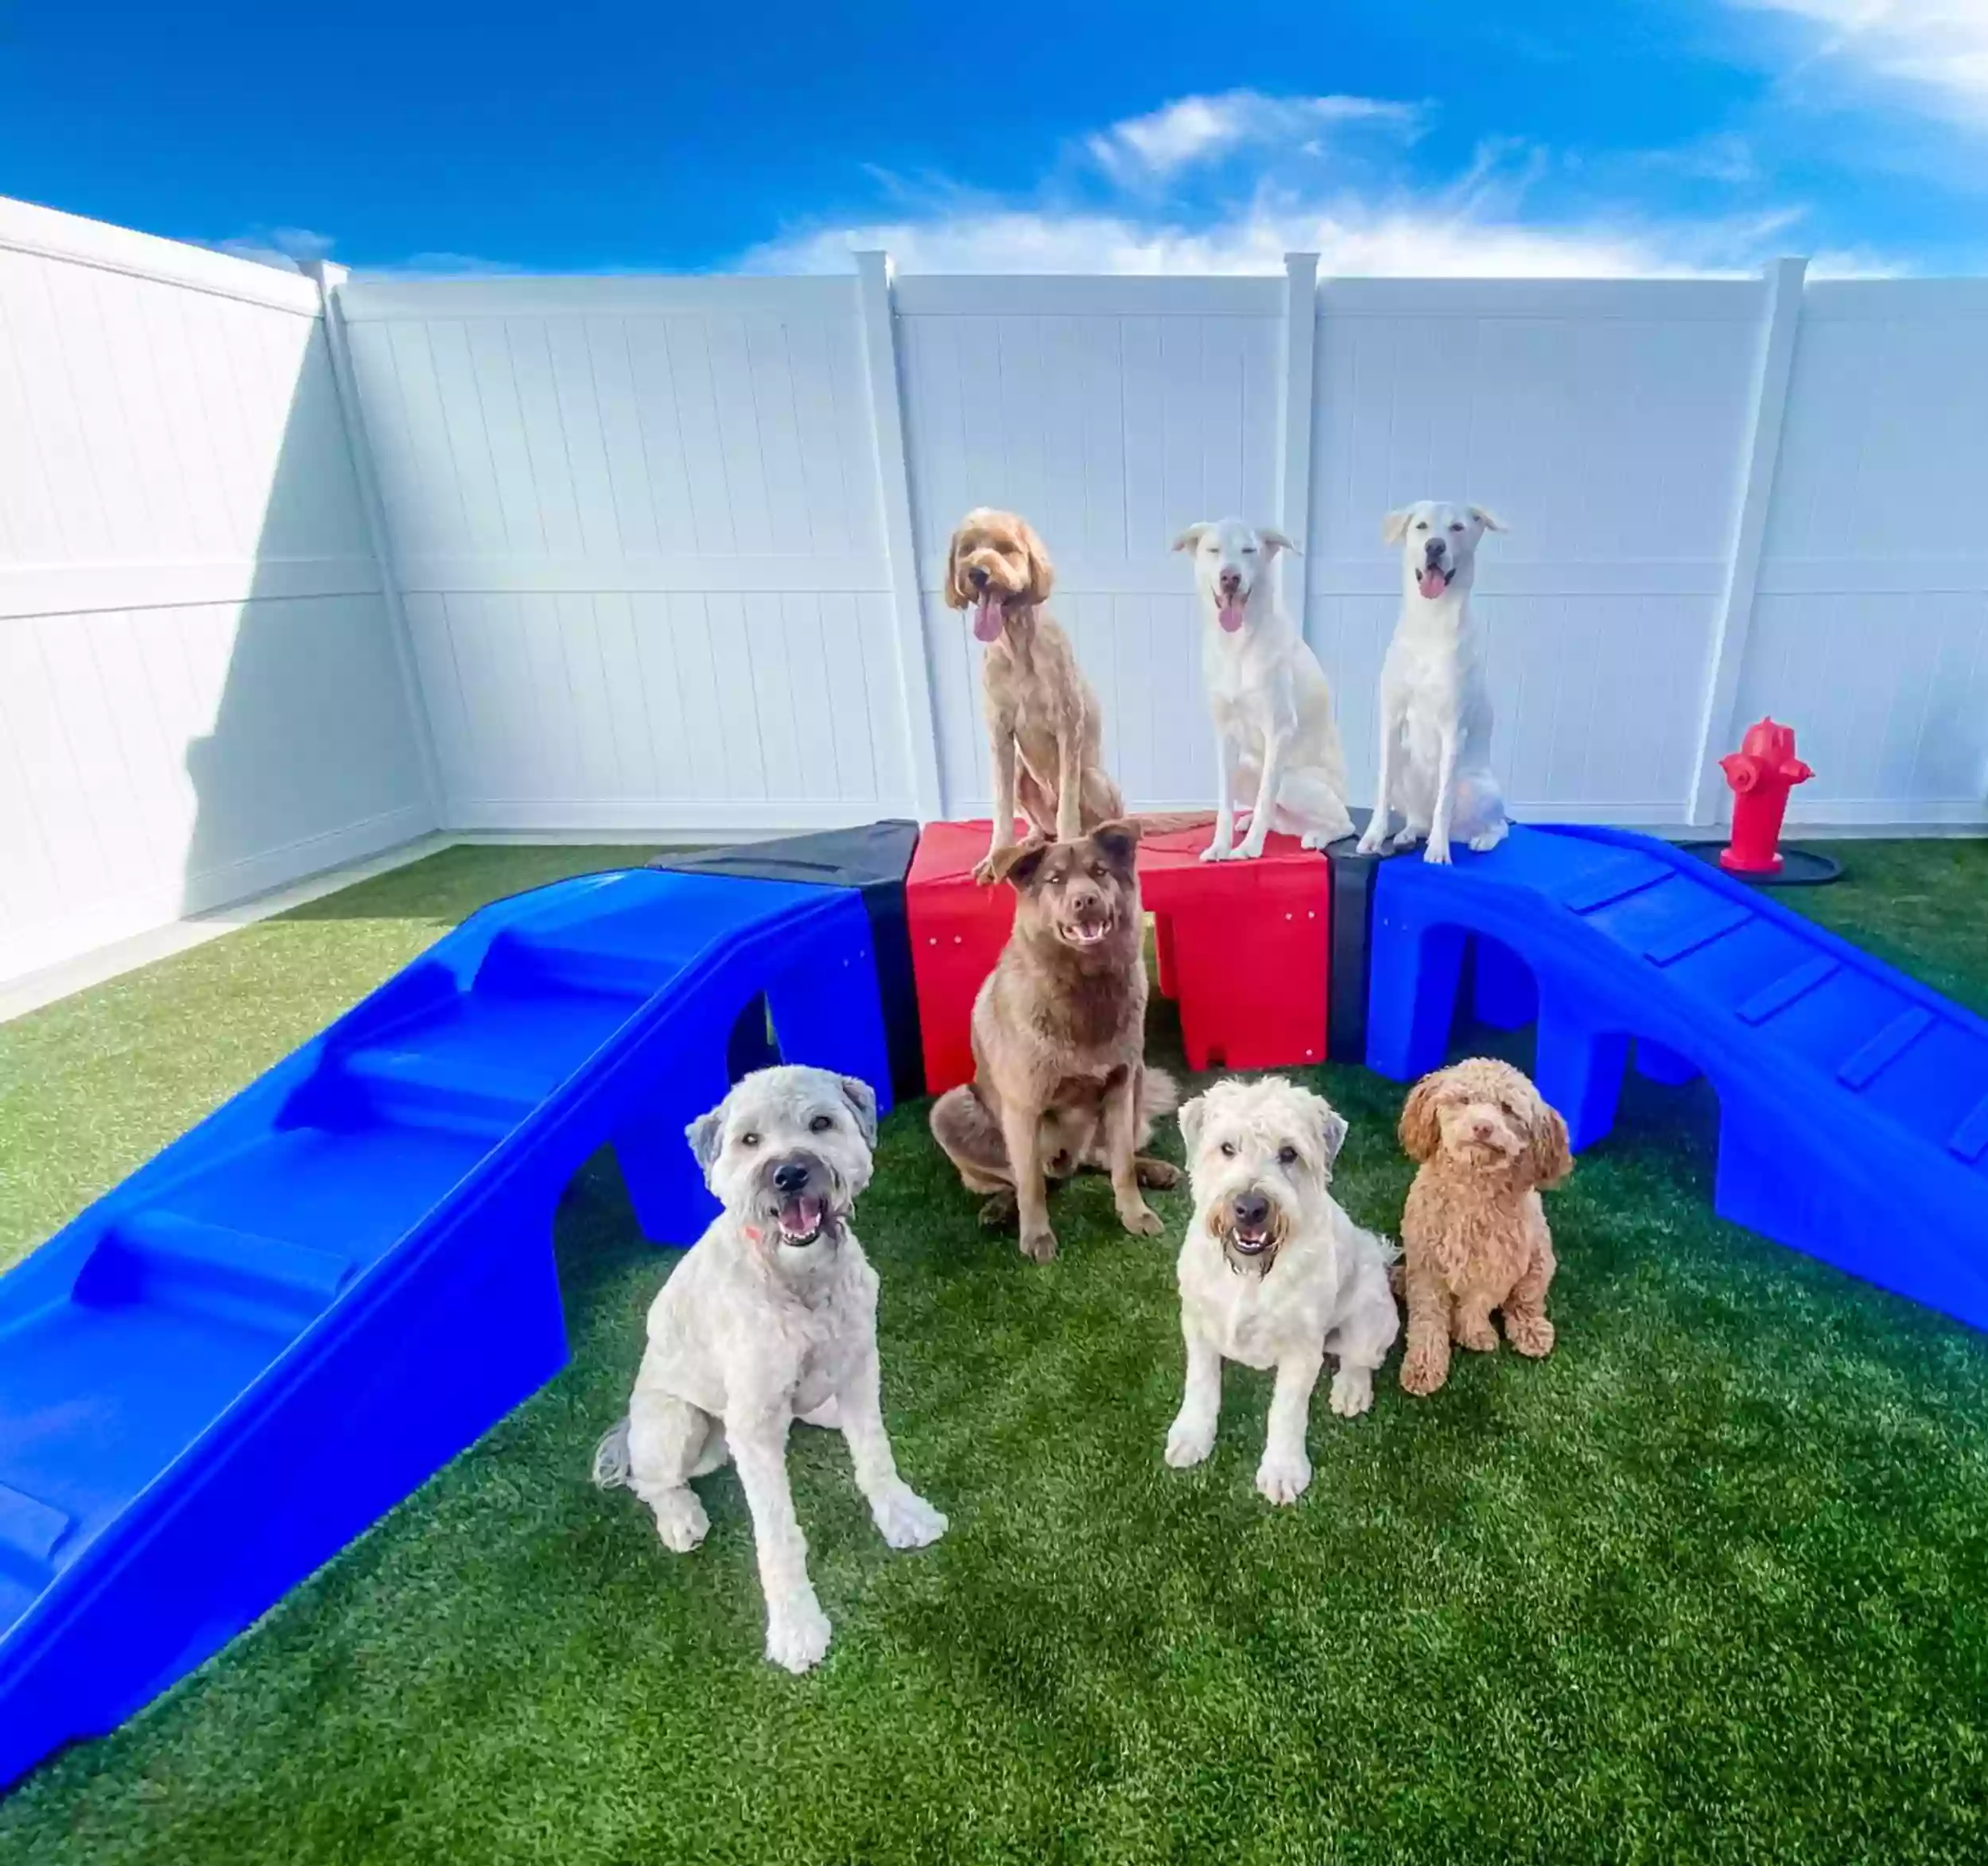 Woof's Play & Stay - South Overland Park